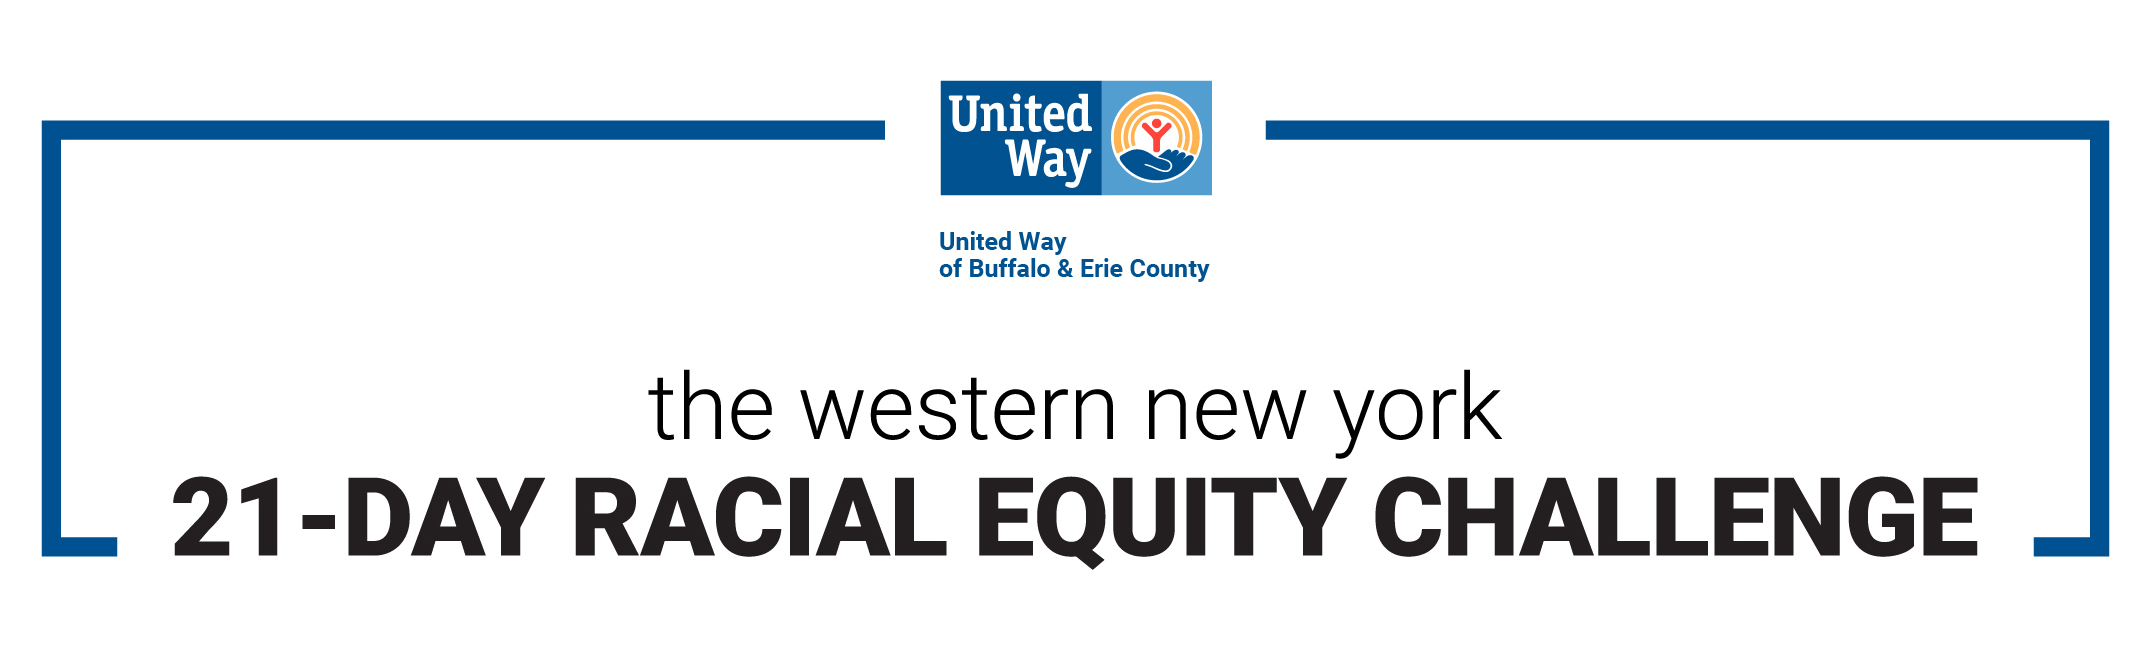 The Western New York 21-Day Racial Equity Challenge 